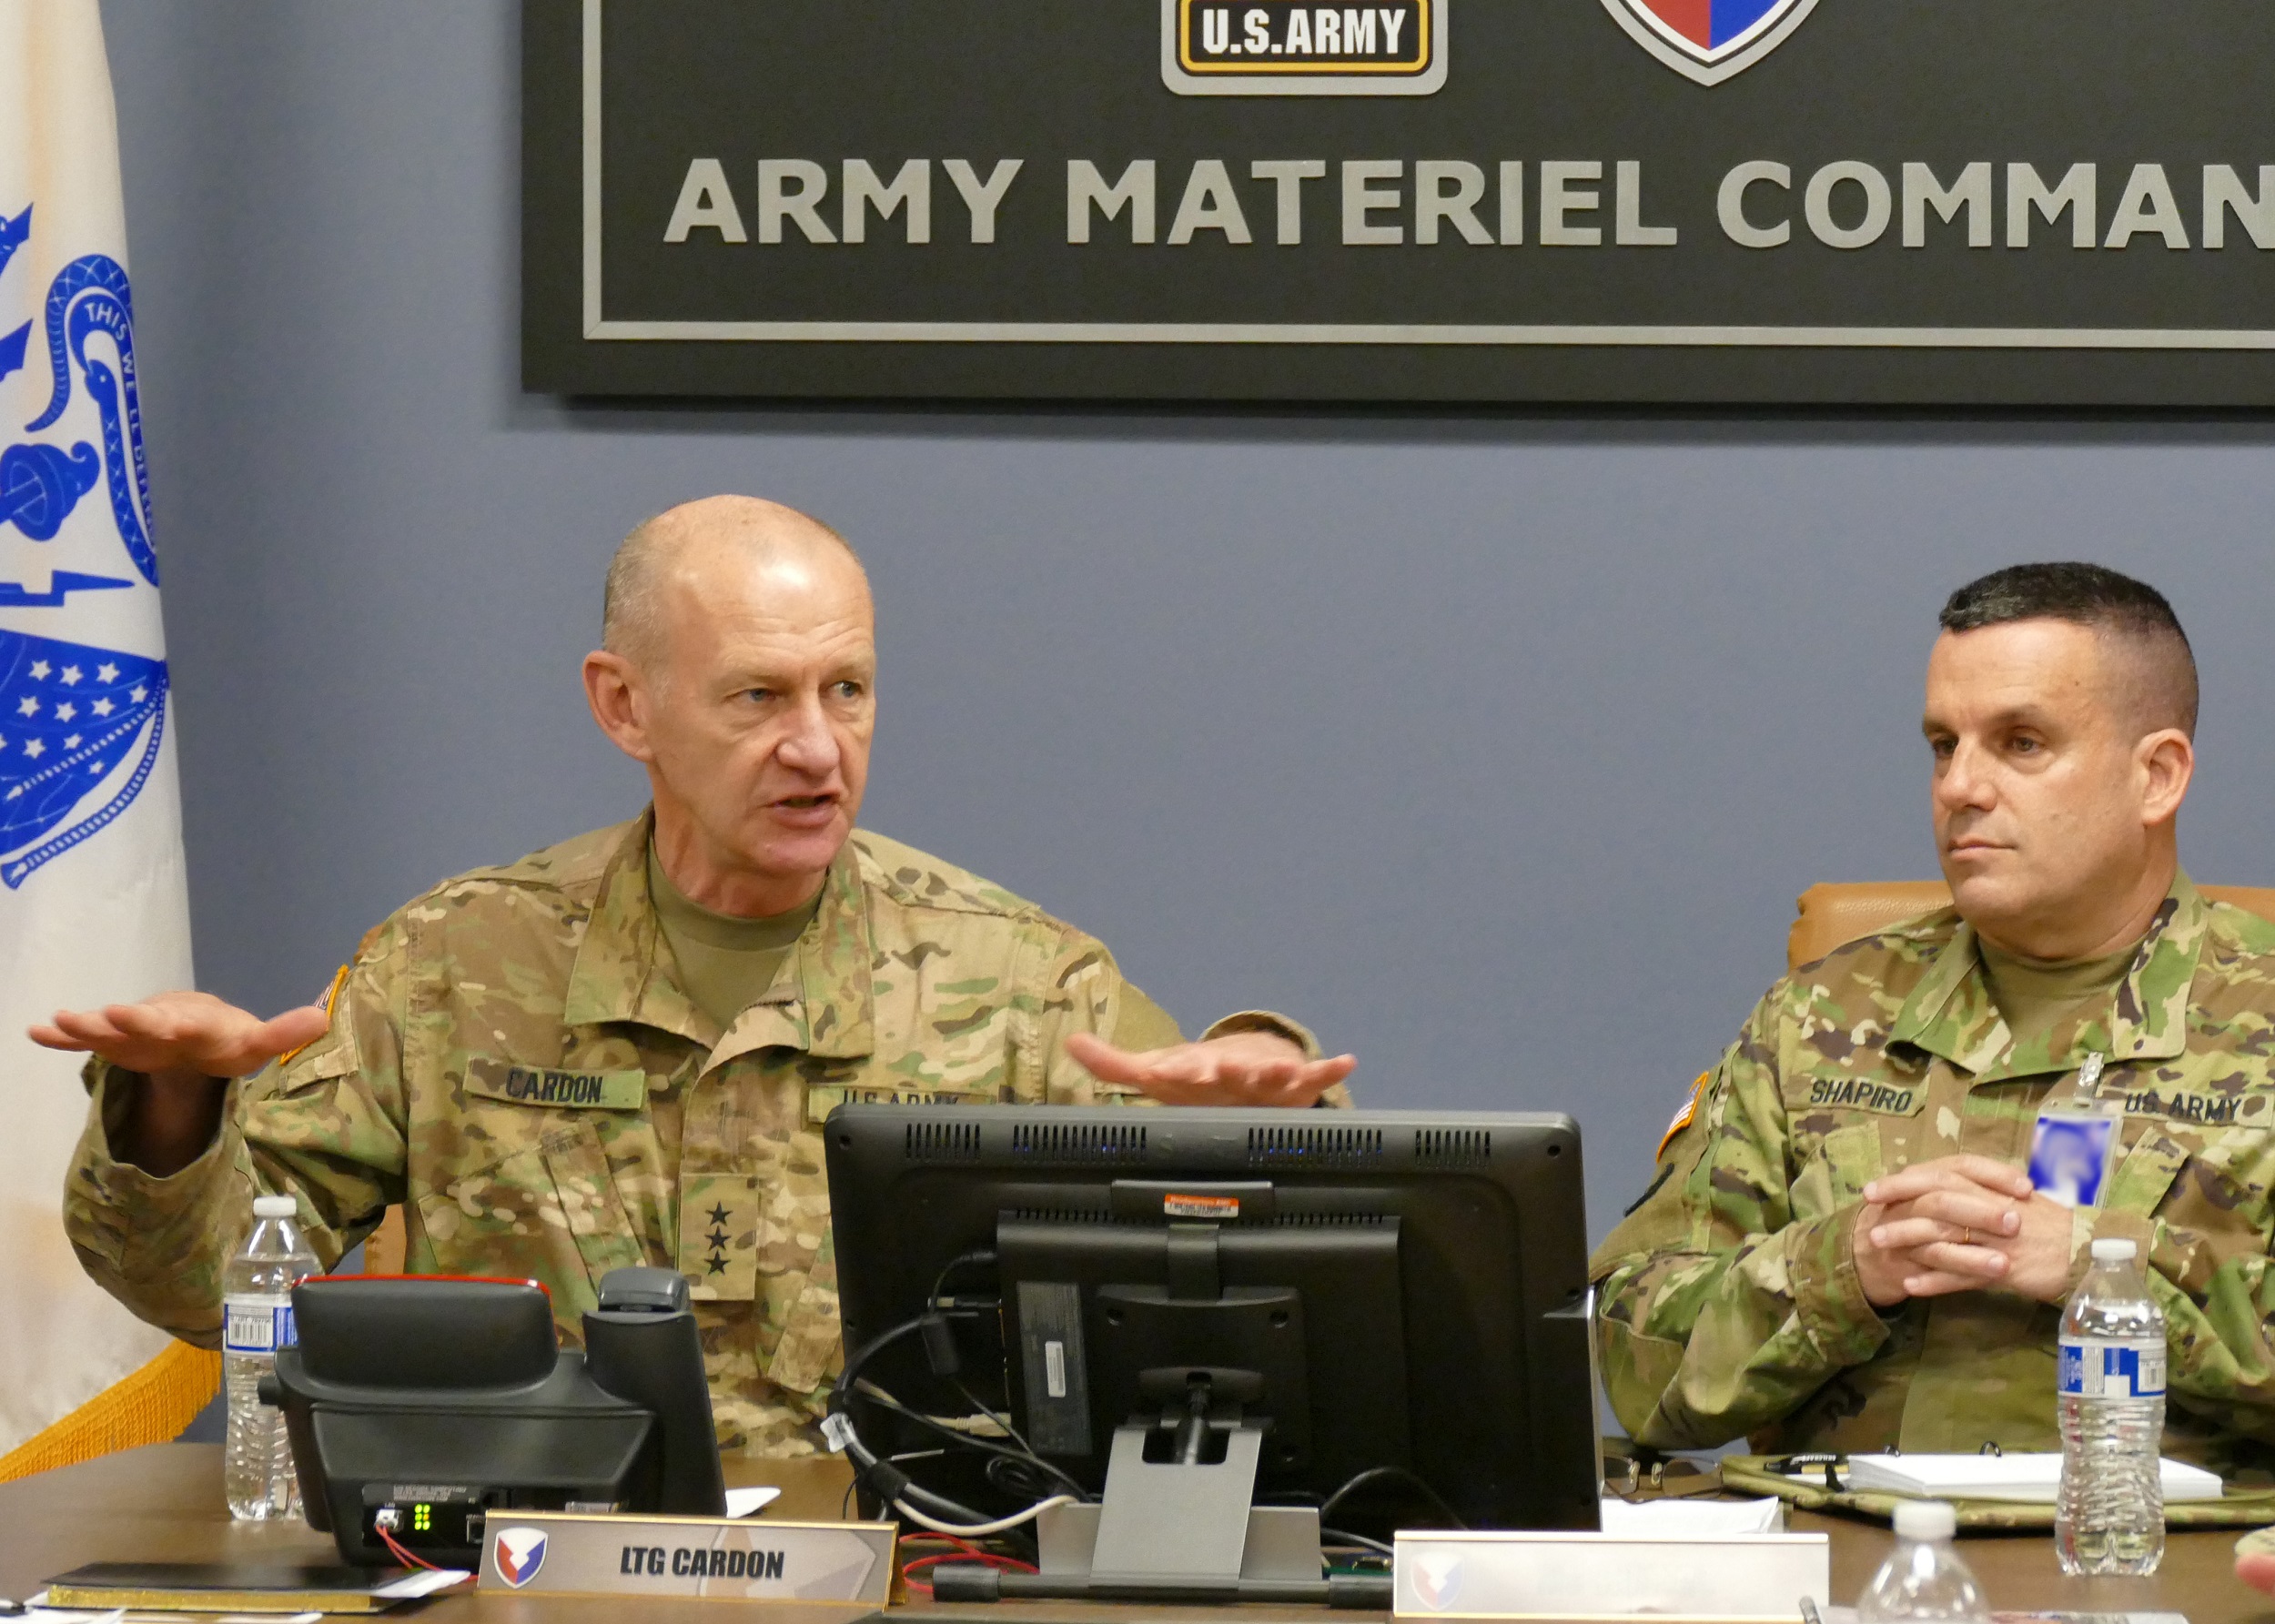 Lt. Gen. Edward C. Cardon leads a roundtable session at AMC headquarters in April 2017. Ross works closely with Cardon and the Army Futures Command Task Force to develop the model of the new modernization enterprise, as well as related processes and policies. (U.S. Army photo by Elizabeth Behring, AMC)